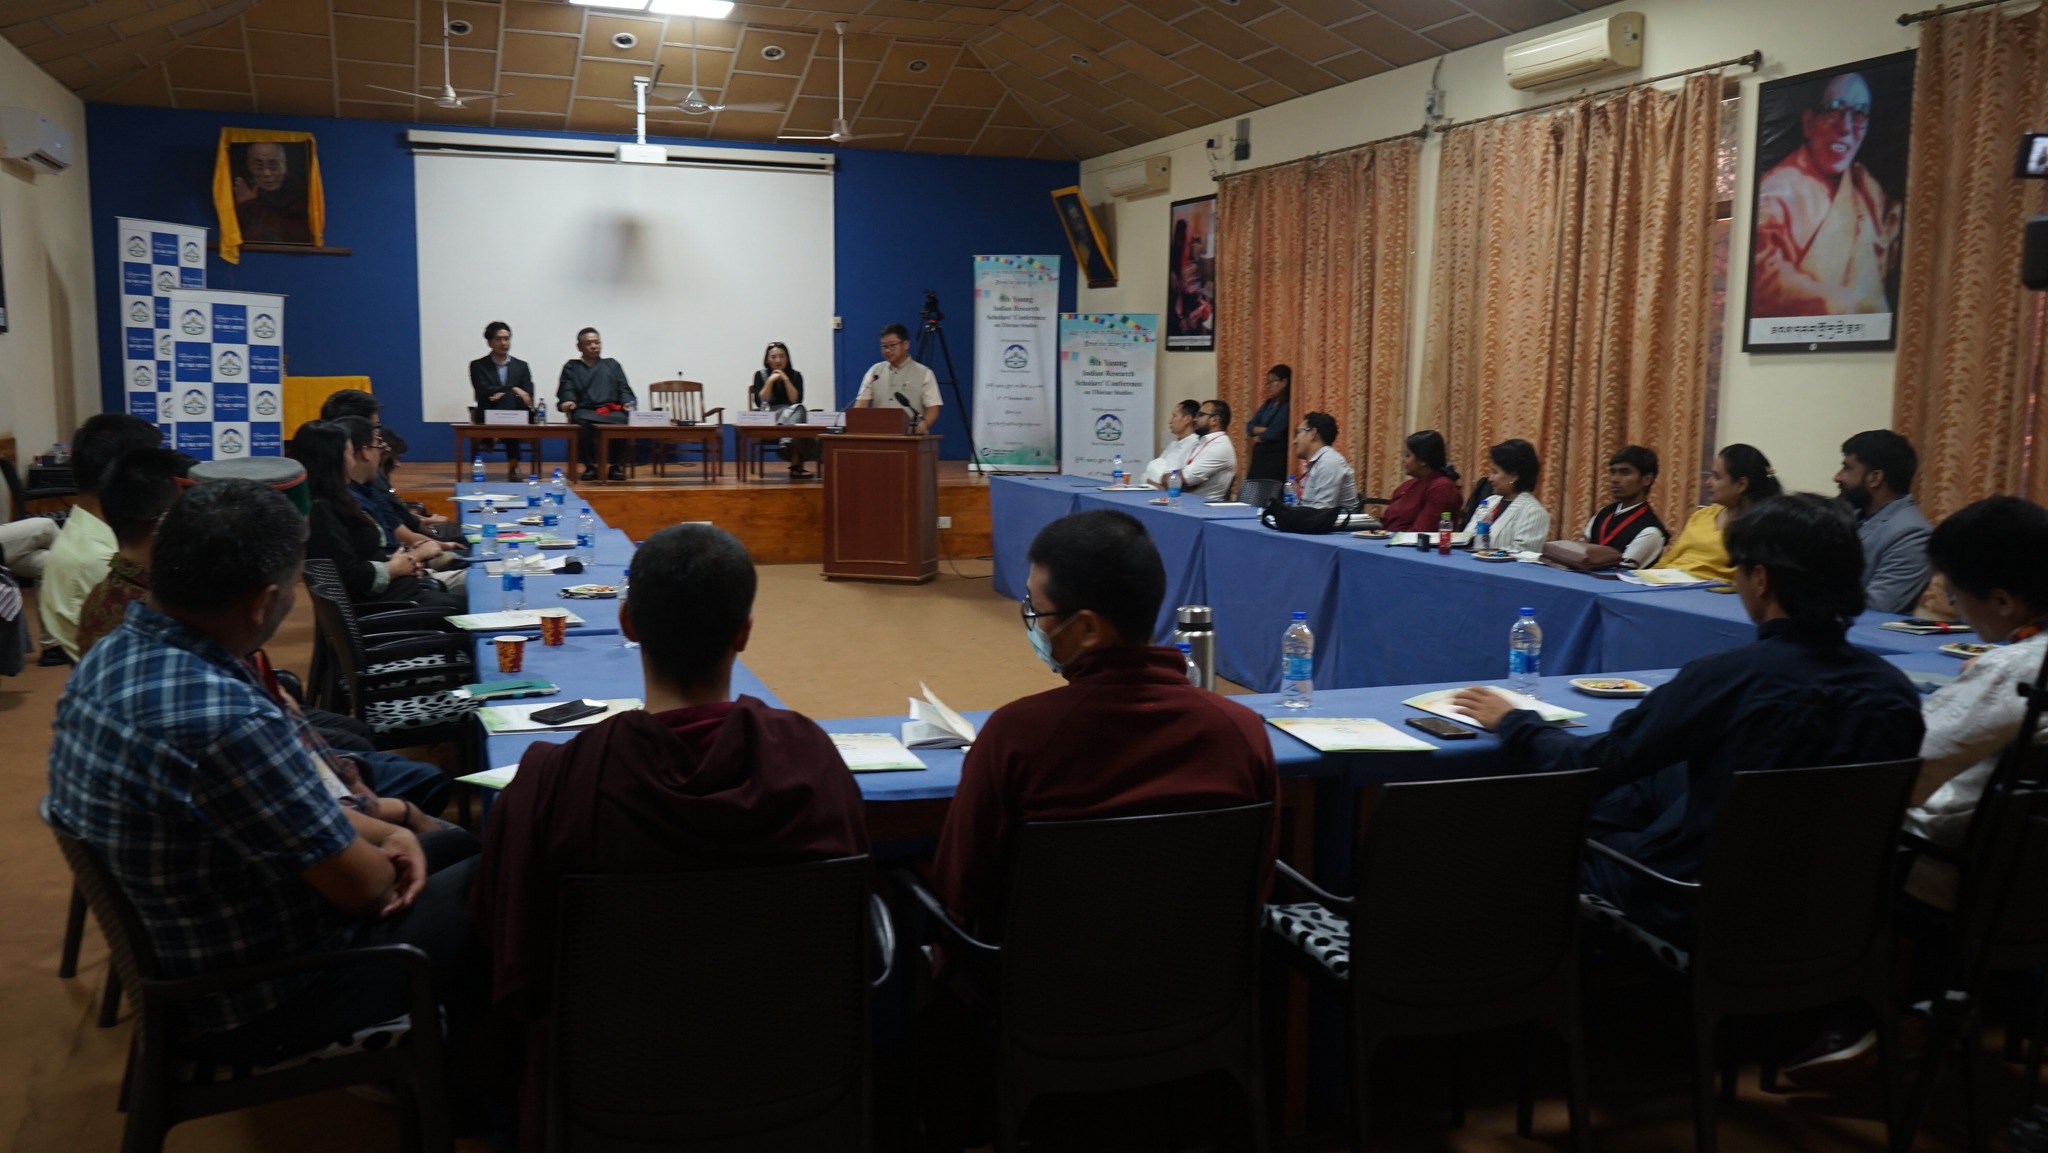 [Mr. Tenzin Lekshay, Additional Secretary of the Department of Information and International Relations and official spokesperson of CTA gave the concluding remarks. He pointed out that it is high time India takes Tibet seriously academically and needs more scholarship on Tibetan studies] 